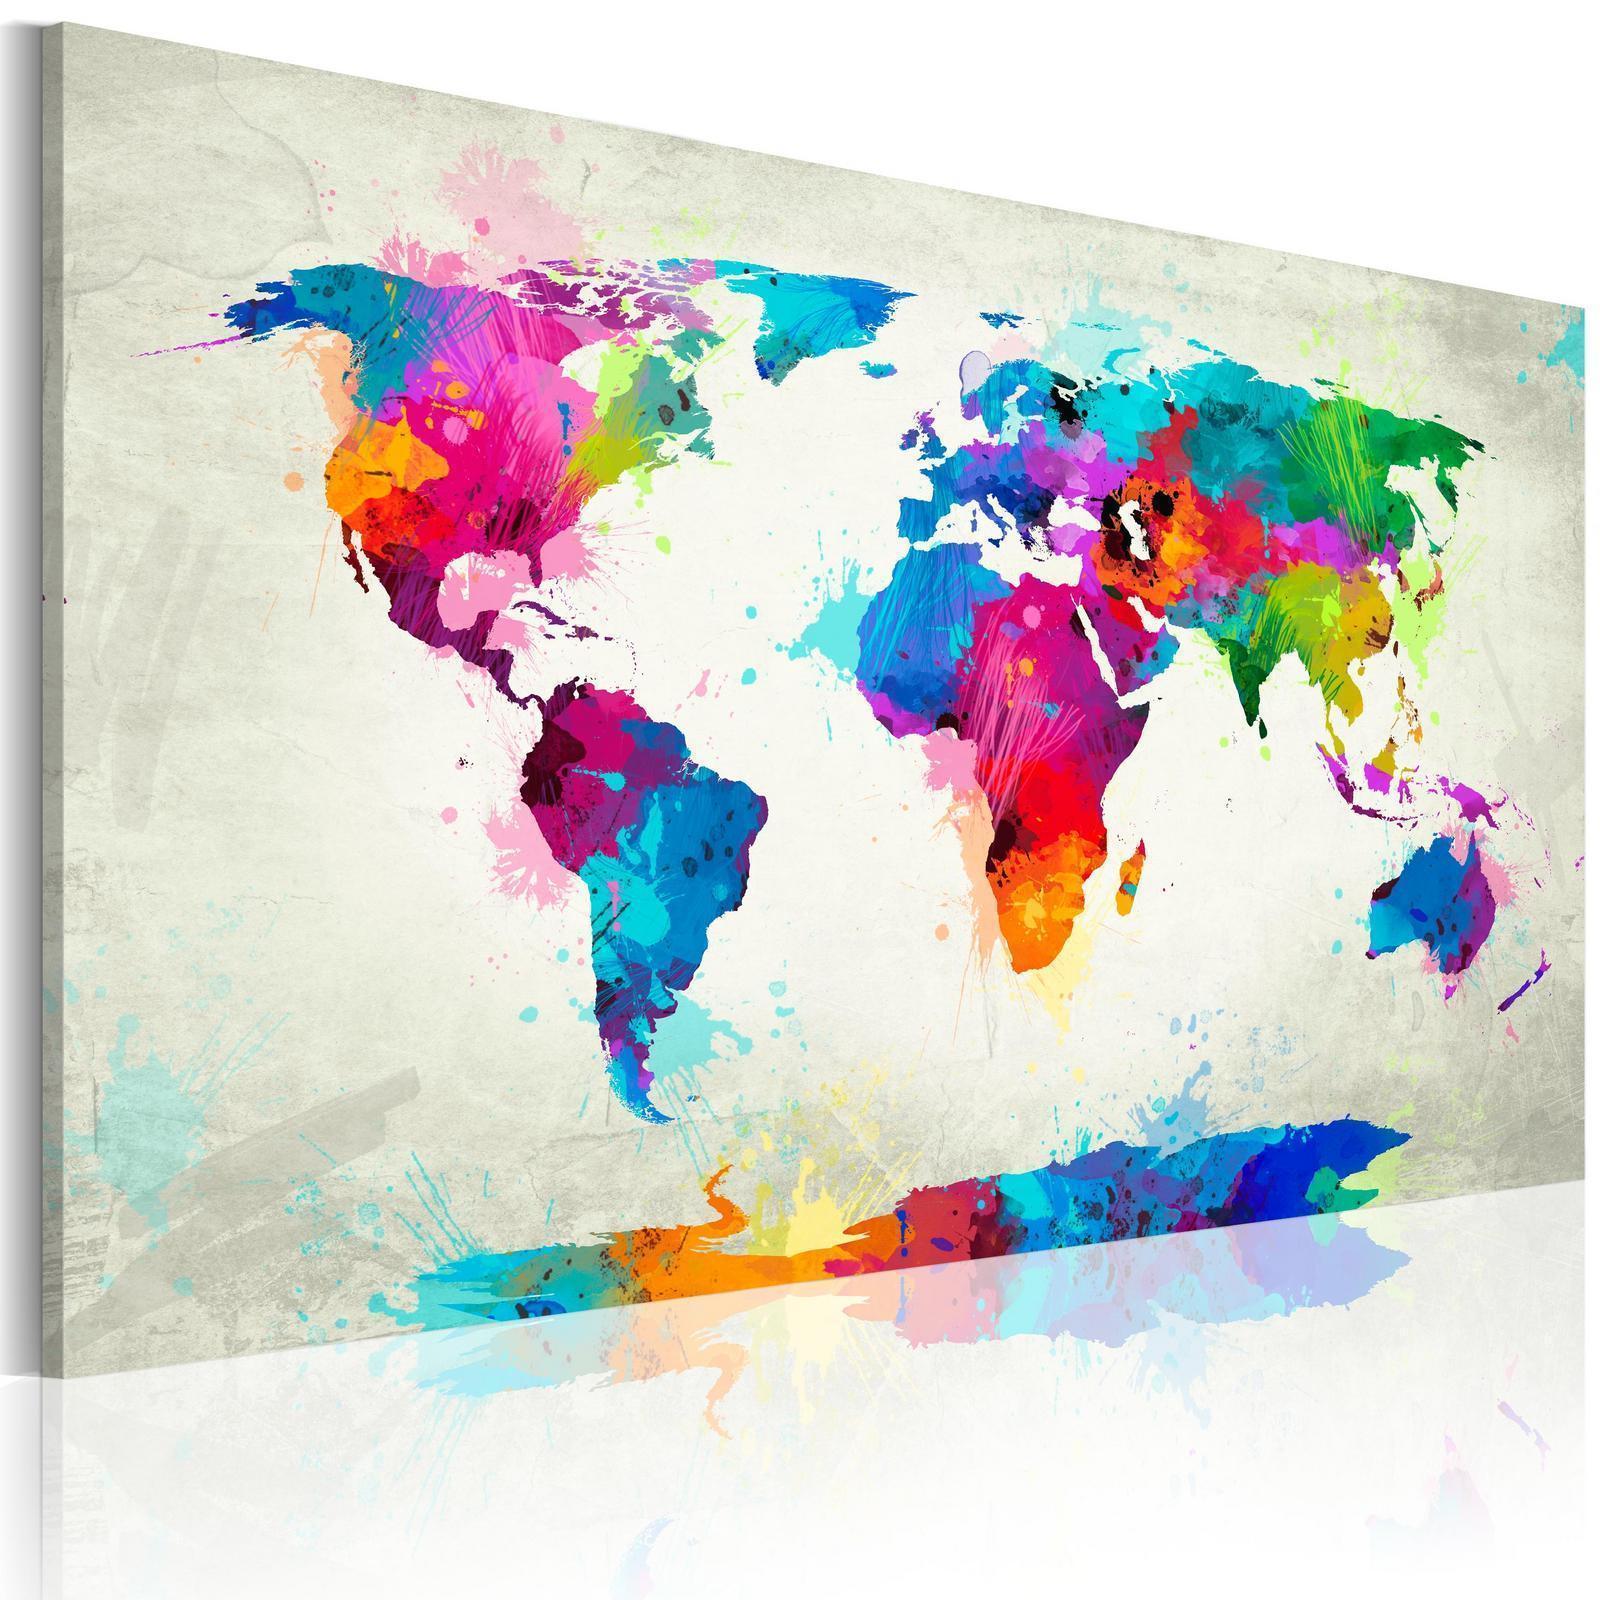 Tableau - Map of the world - an explosion of colors